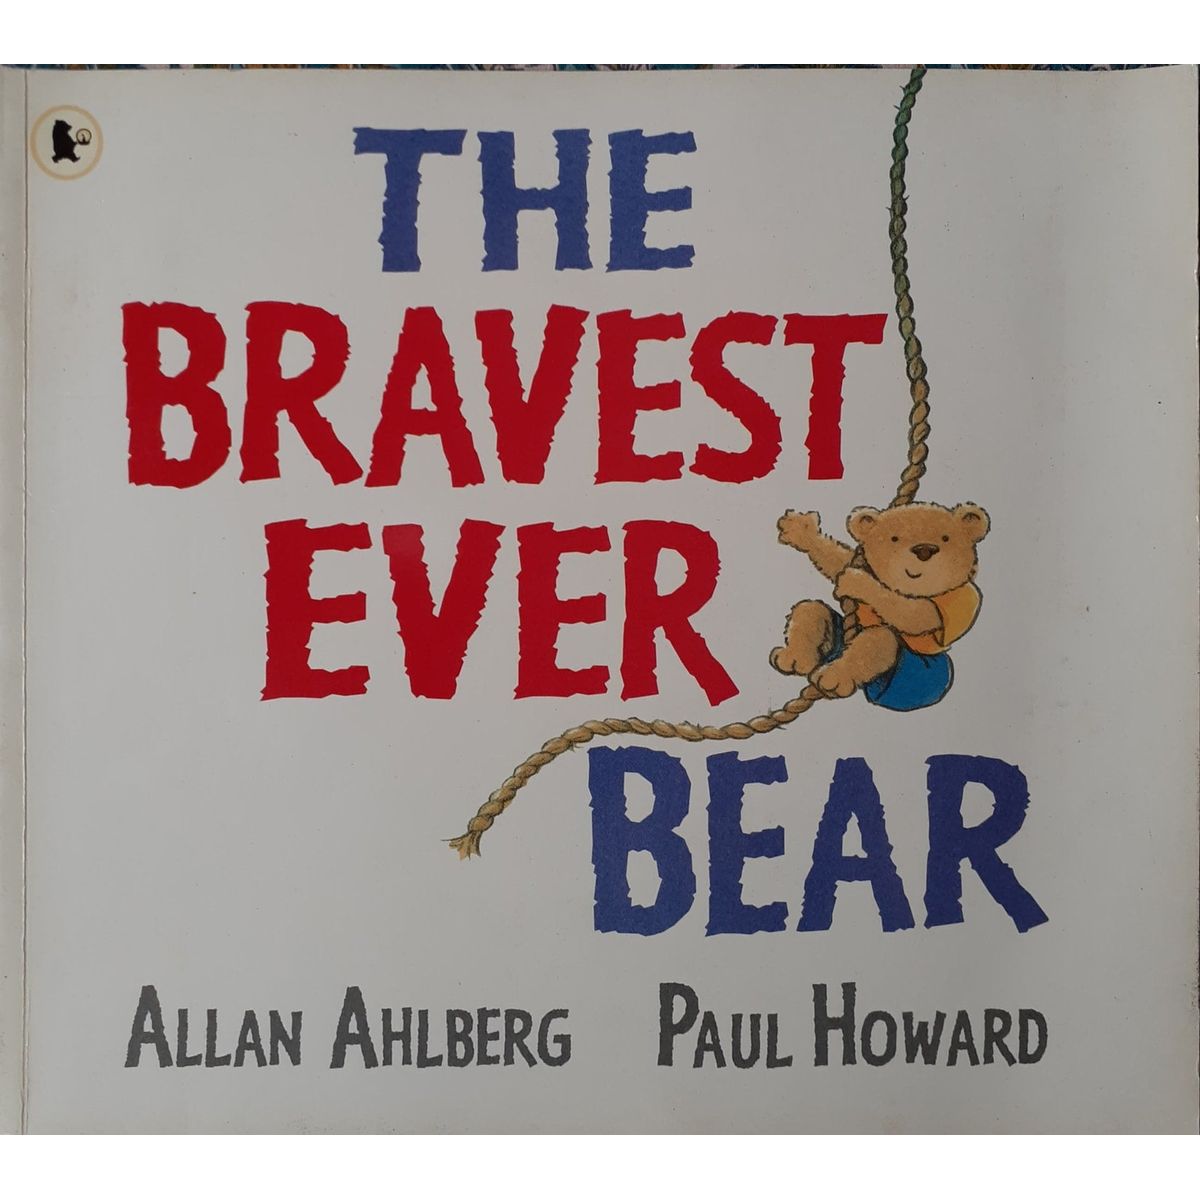 ISBN: 9781406328073 / 1406328073 - The Bravest Ever Bear by Allan Ahlberg, illustrated by Paul Howard [2010]